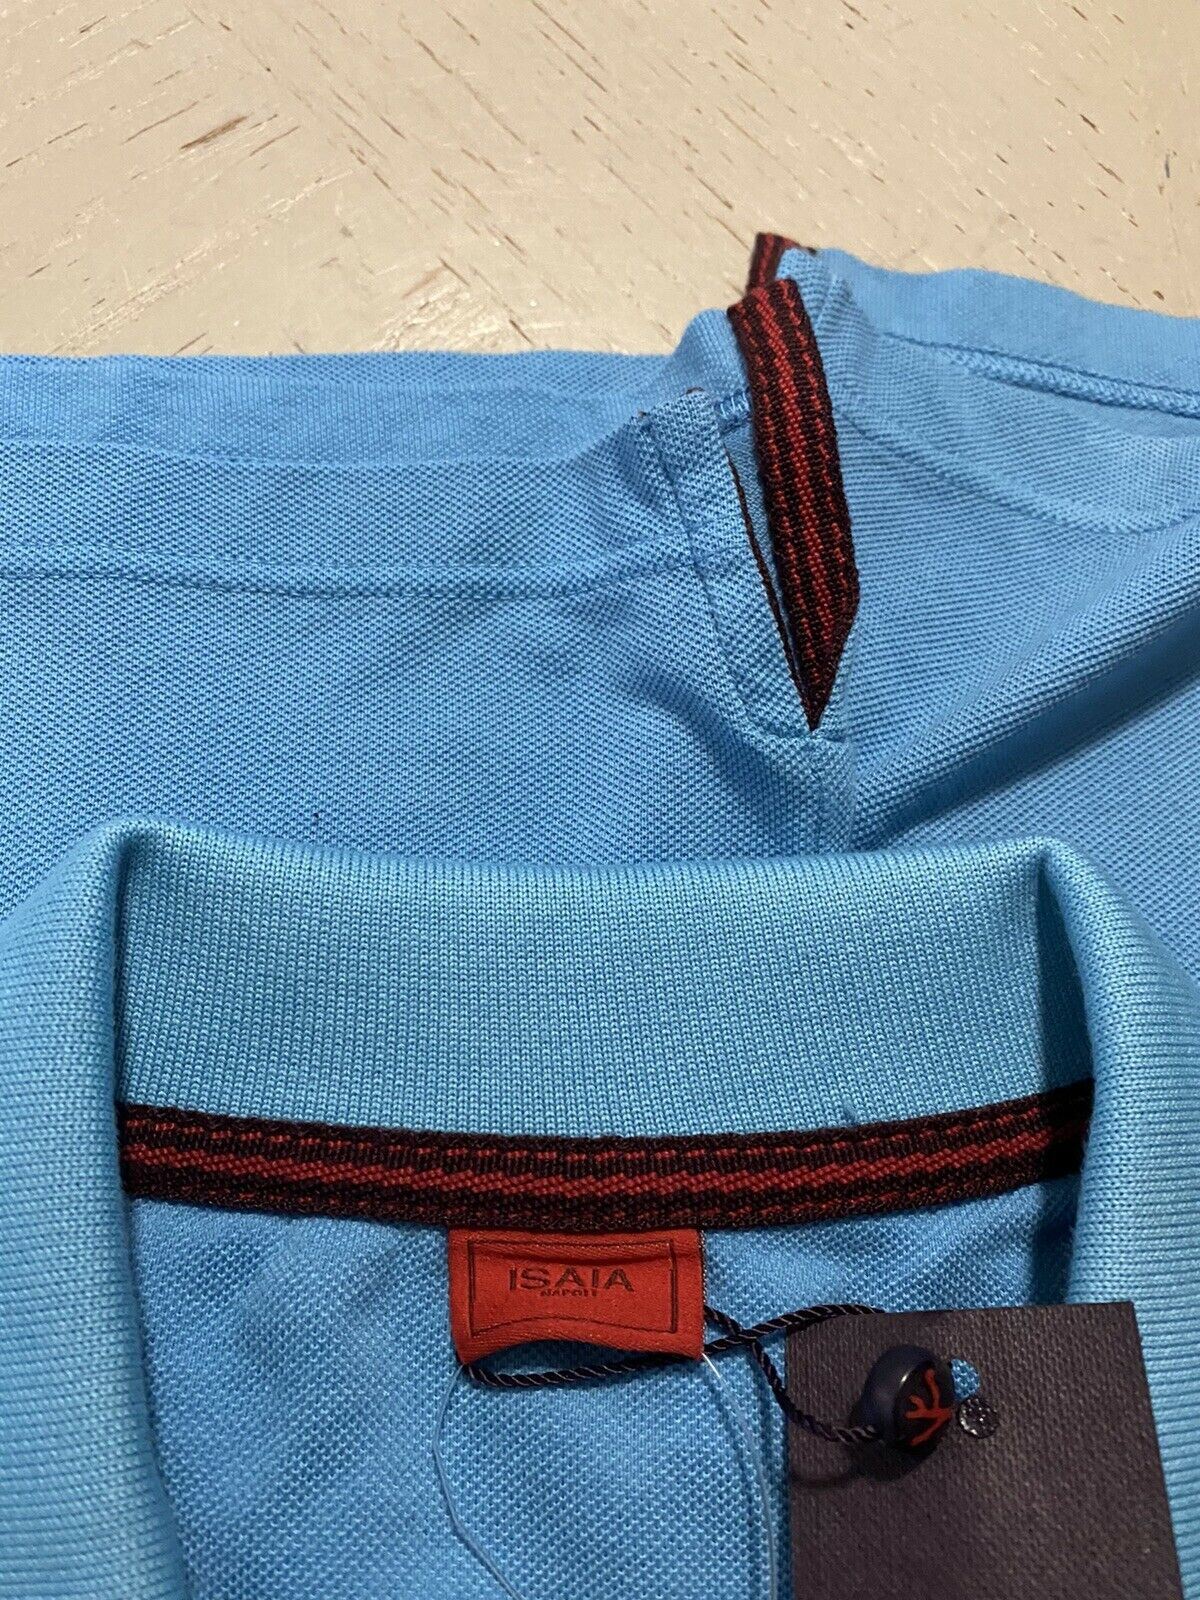 NWT $475 Isaia Short Sleeve Polo Shirt Color  TURQUOISE Size XL Italy